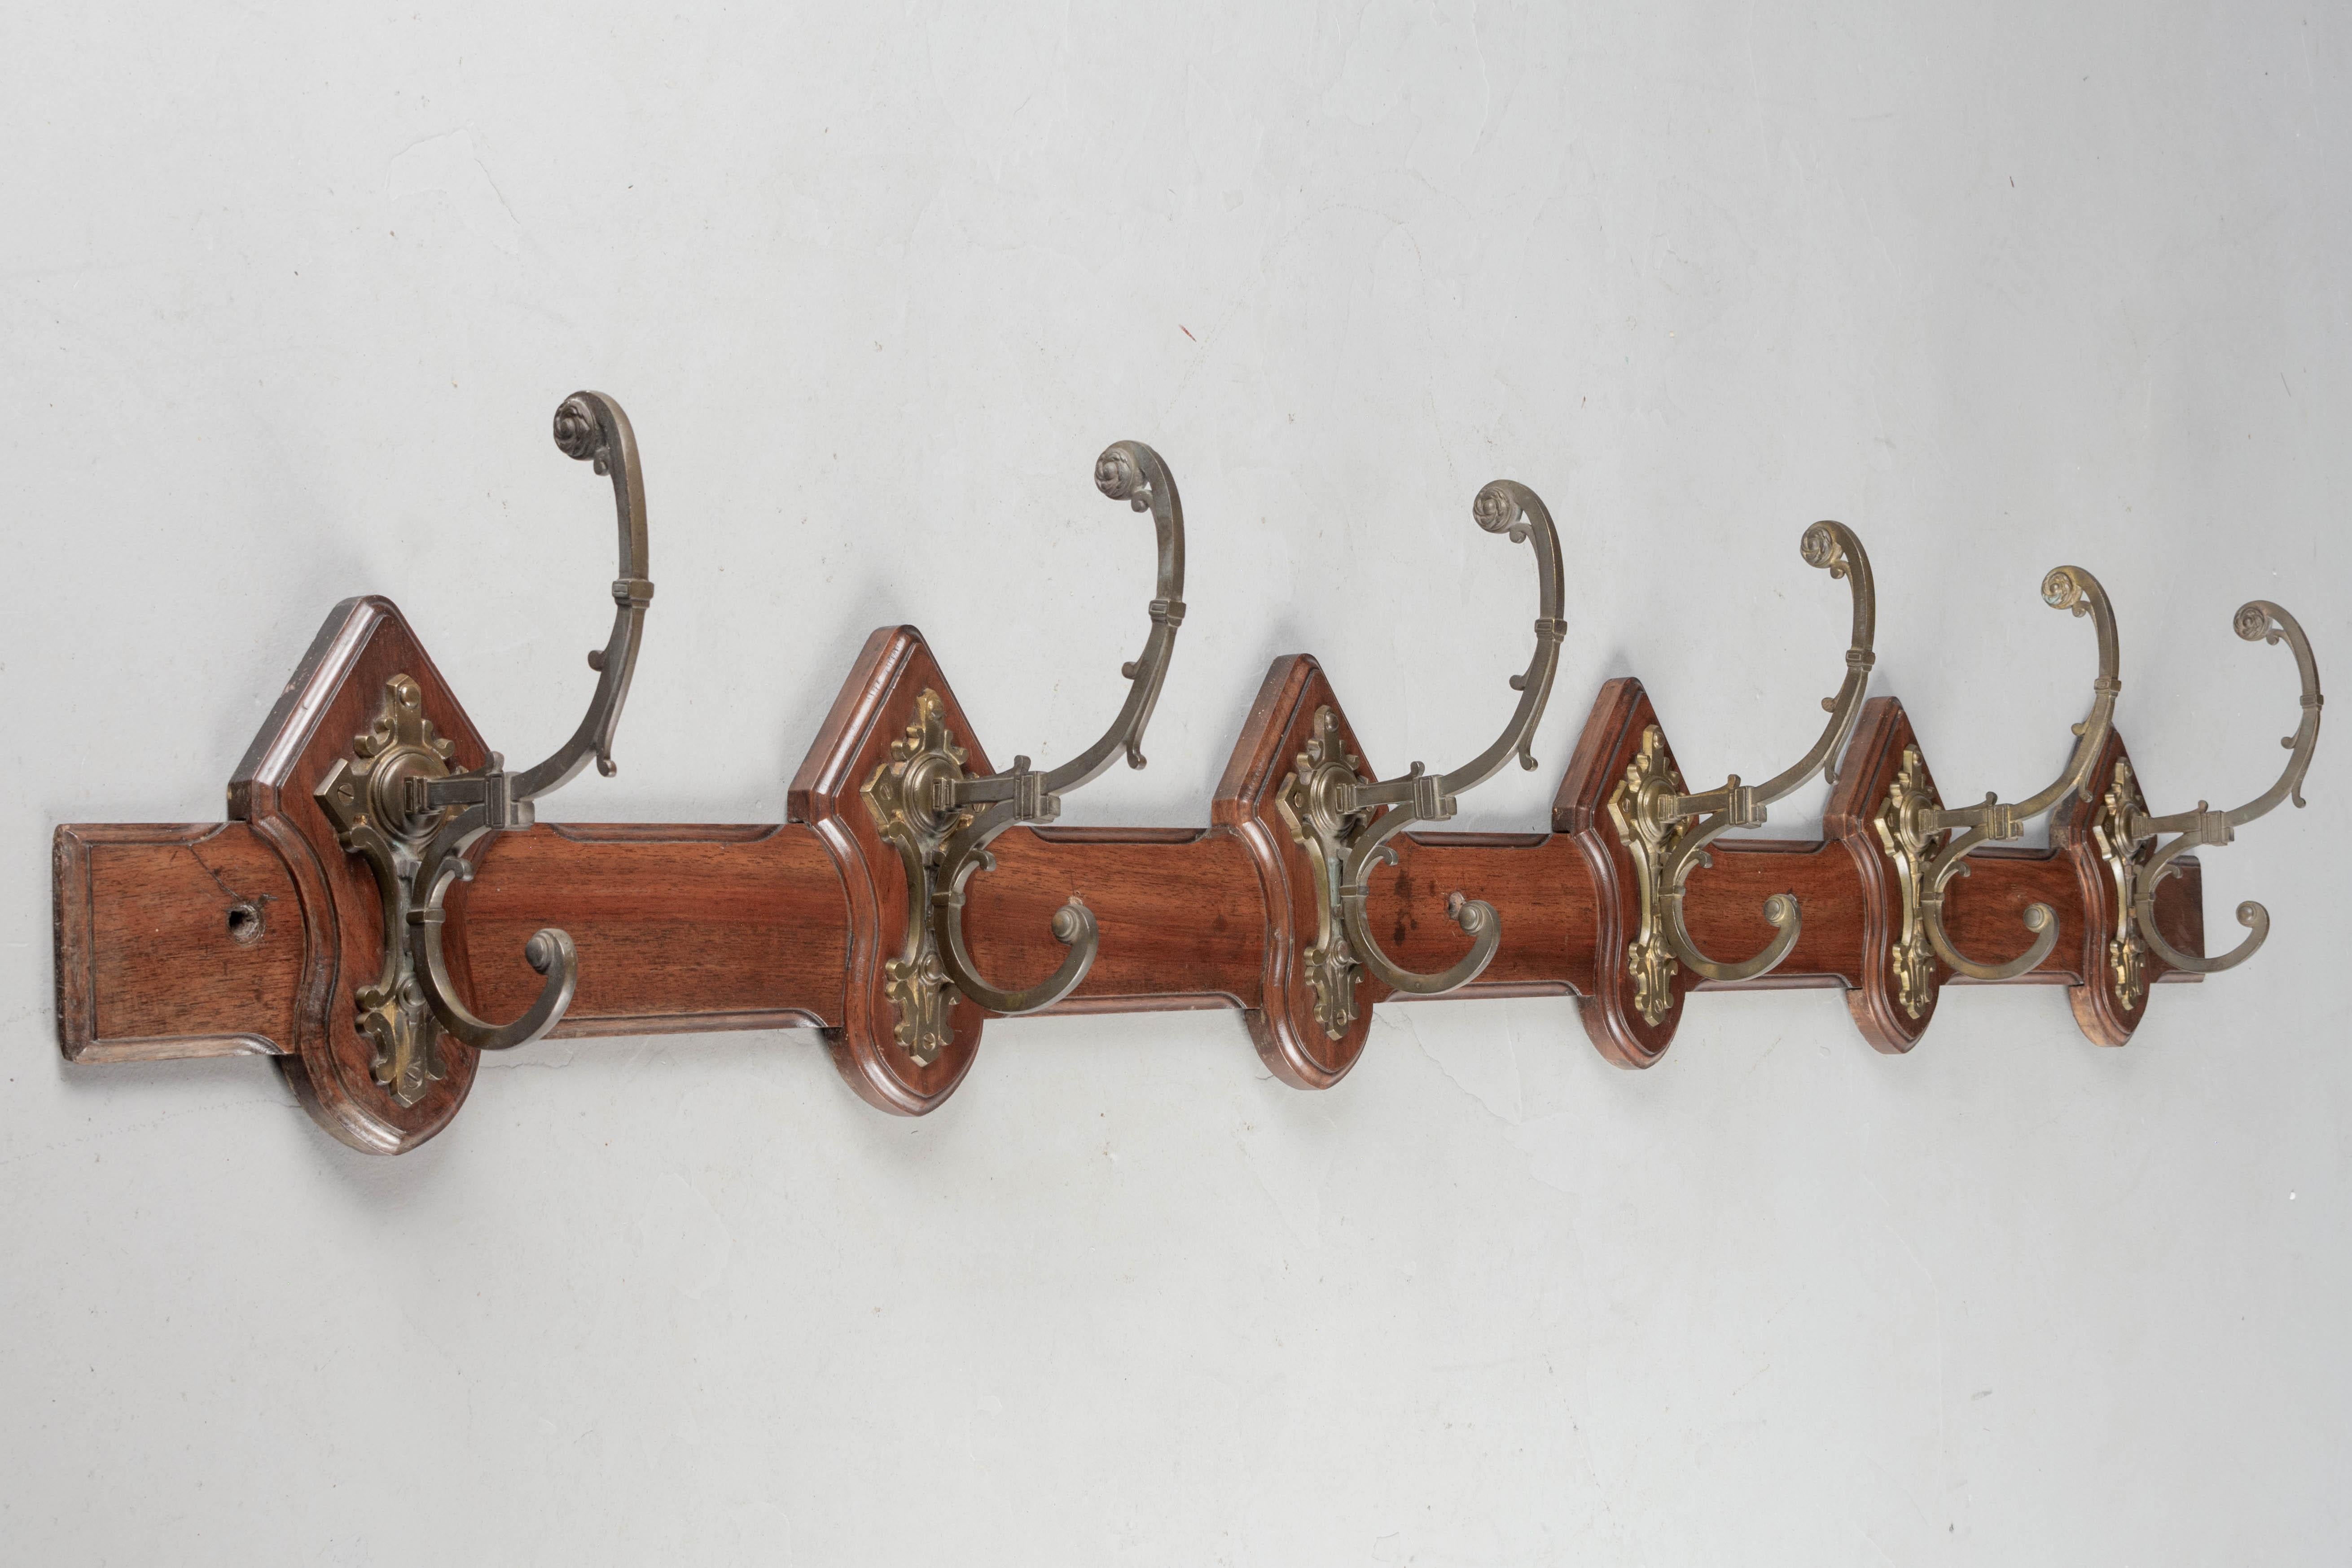 French Mahogany Porte Manteau or Coat Rack In Good Condition For Sale In Winter Park, FL